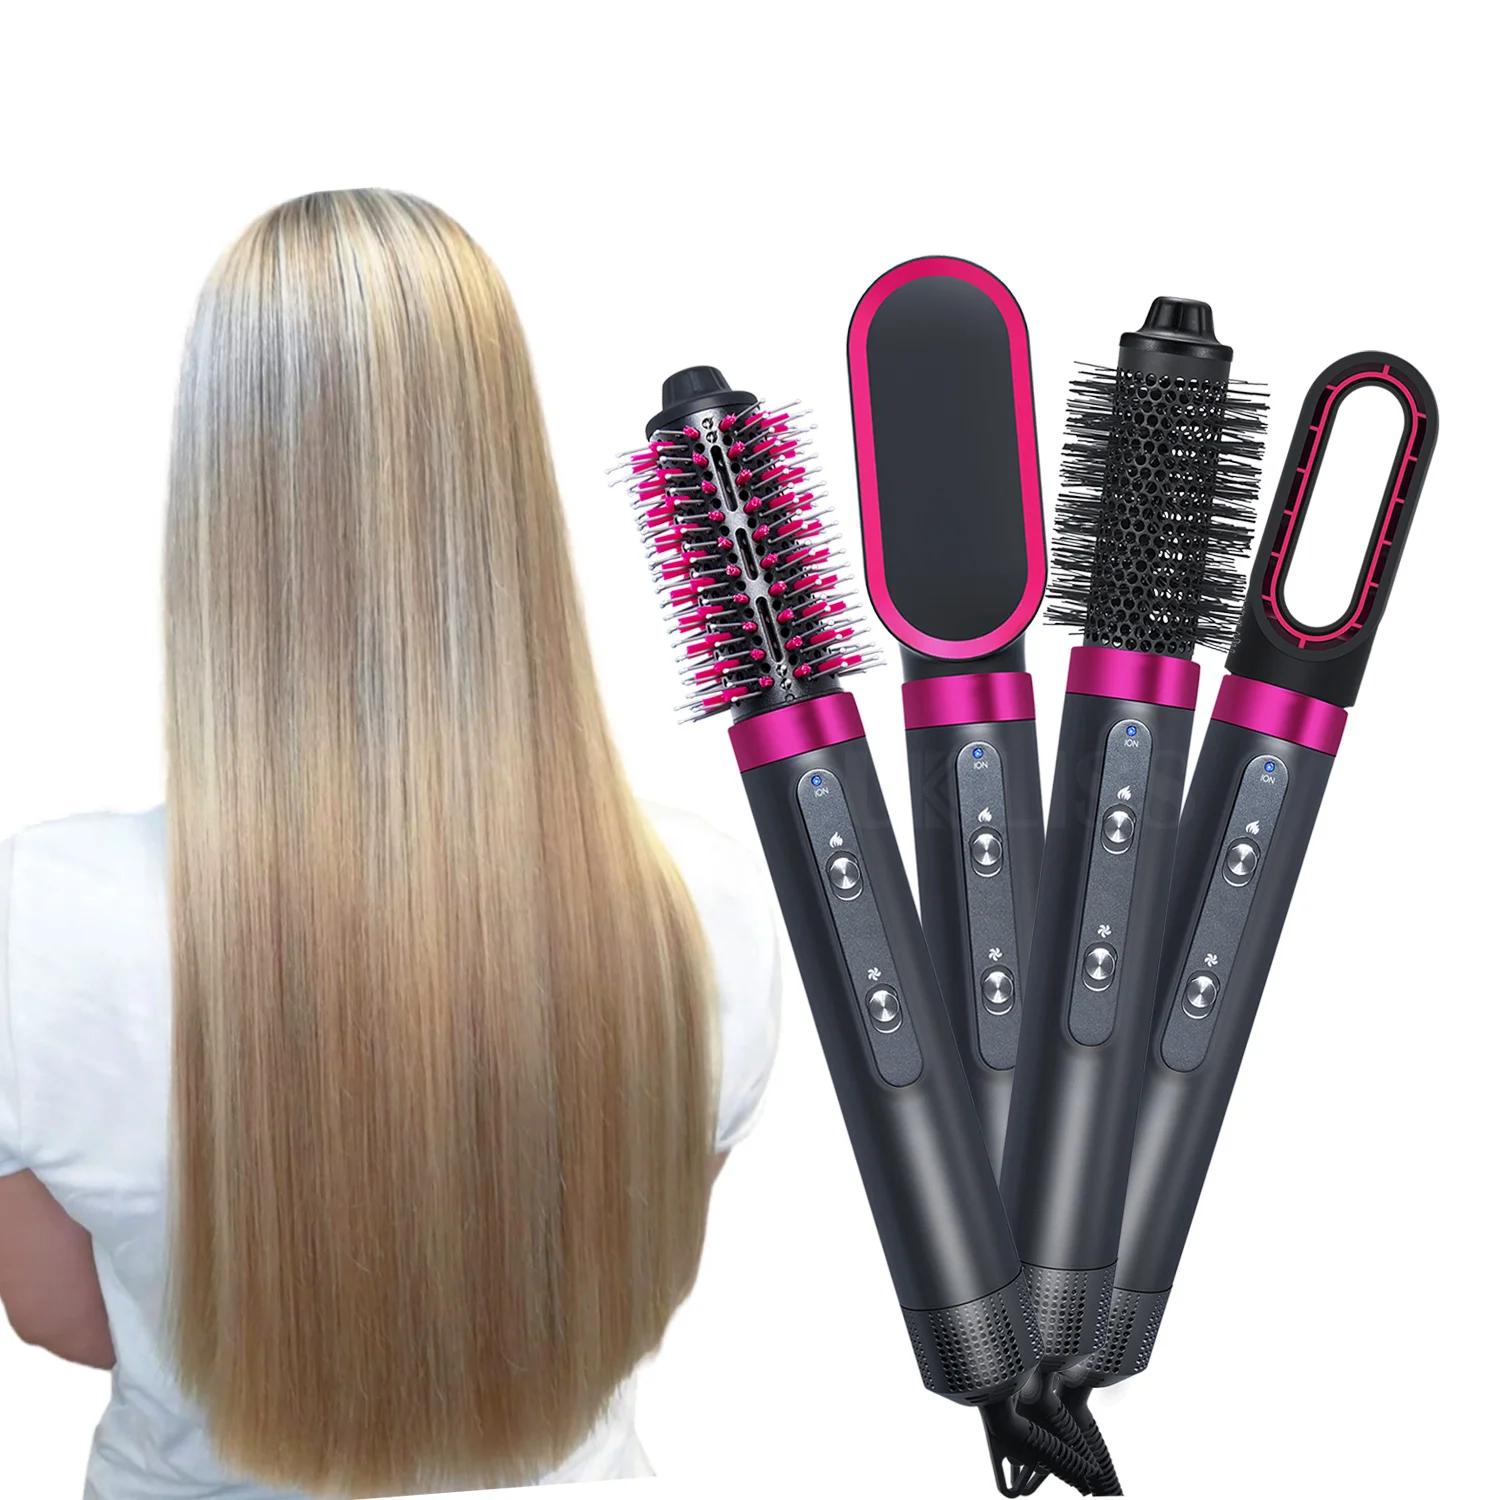 4 In 1 One Step Styler Hair Dryer And Volumizer Hot Air Brush Hair Styler -  Buy Hot Air Brush,One Step Hair Dryer,4 In 1 Hair Styler Product on  